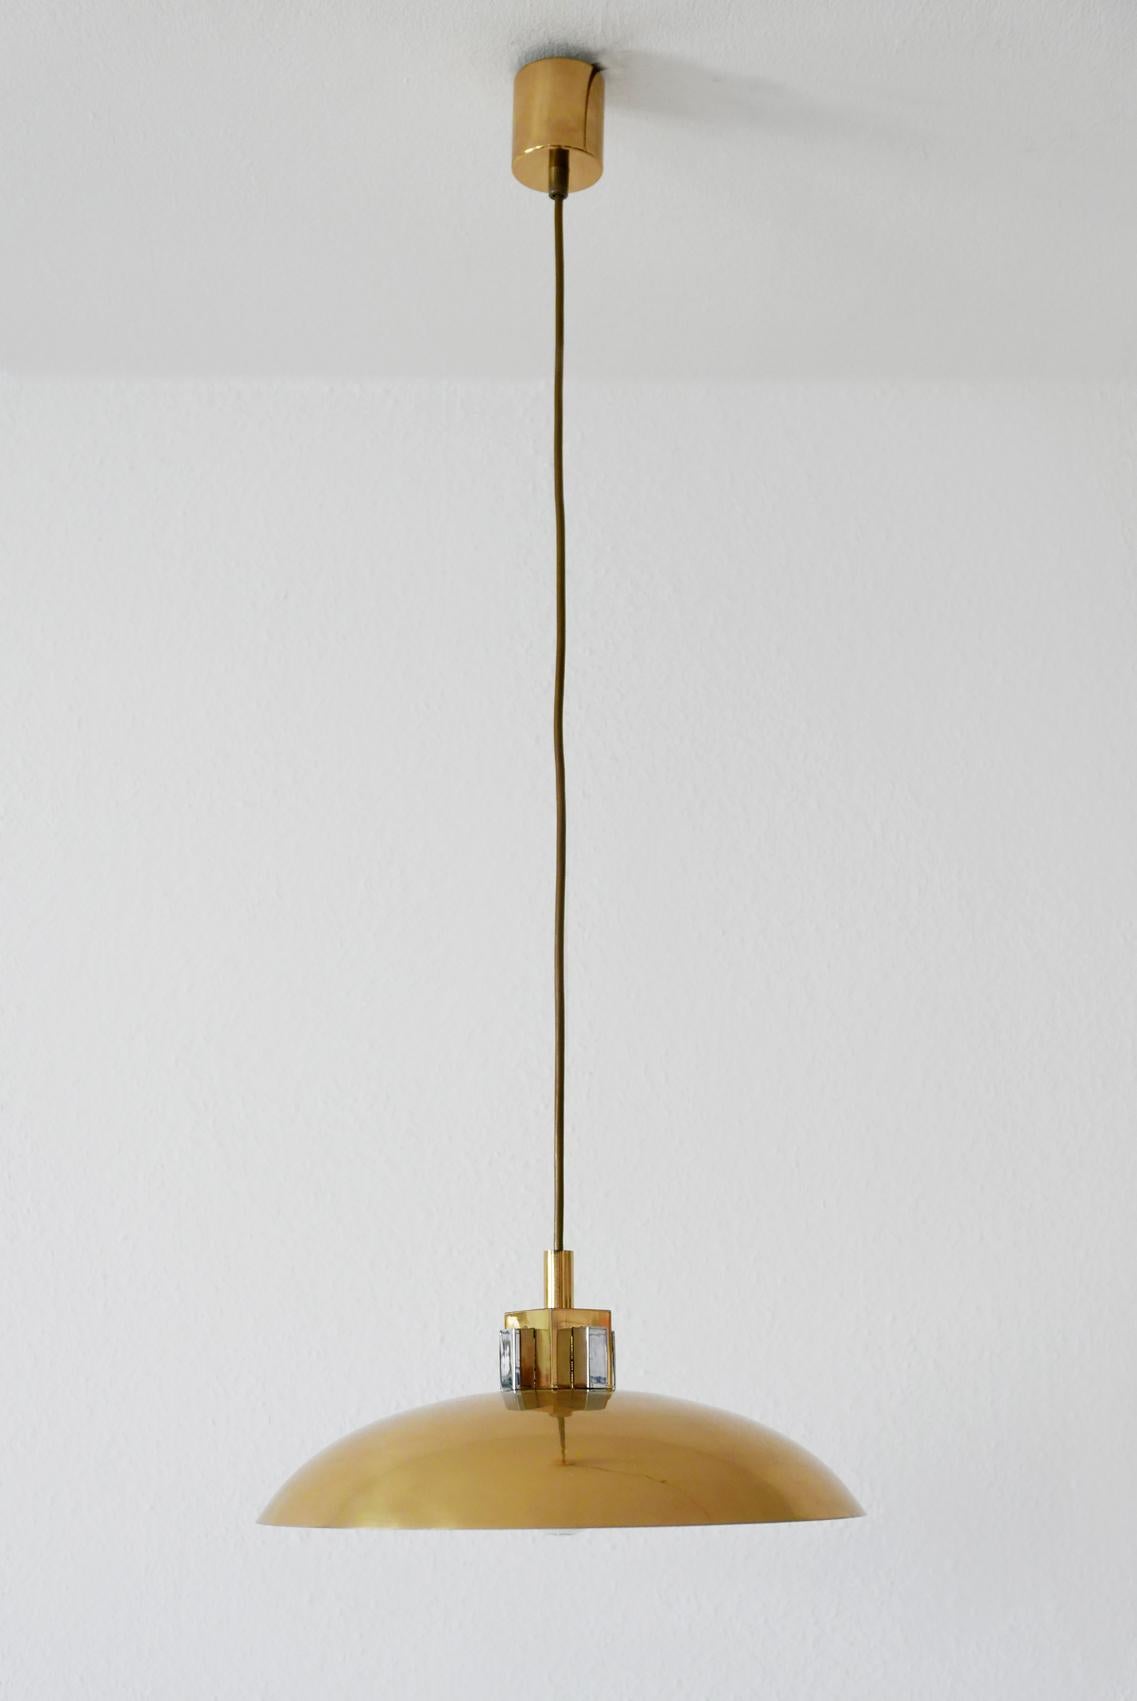 Beautiful Mid-Century Modern pendant lamp in Art Deco design. Manufactured by Art-line Wohndecor, 1980s, Cologne, Germany

Executed in polished brass. The lamp needs one E27 Edison screw fit bulb, is wired. It runs both on 110 / 230 Volt.